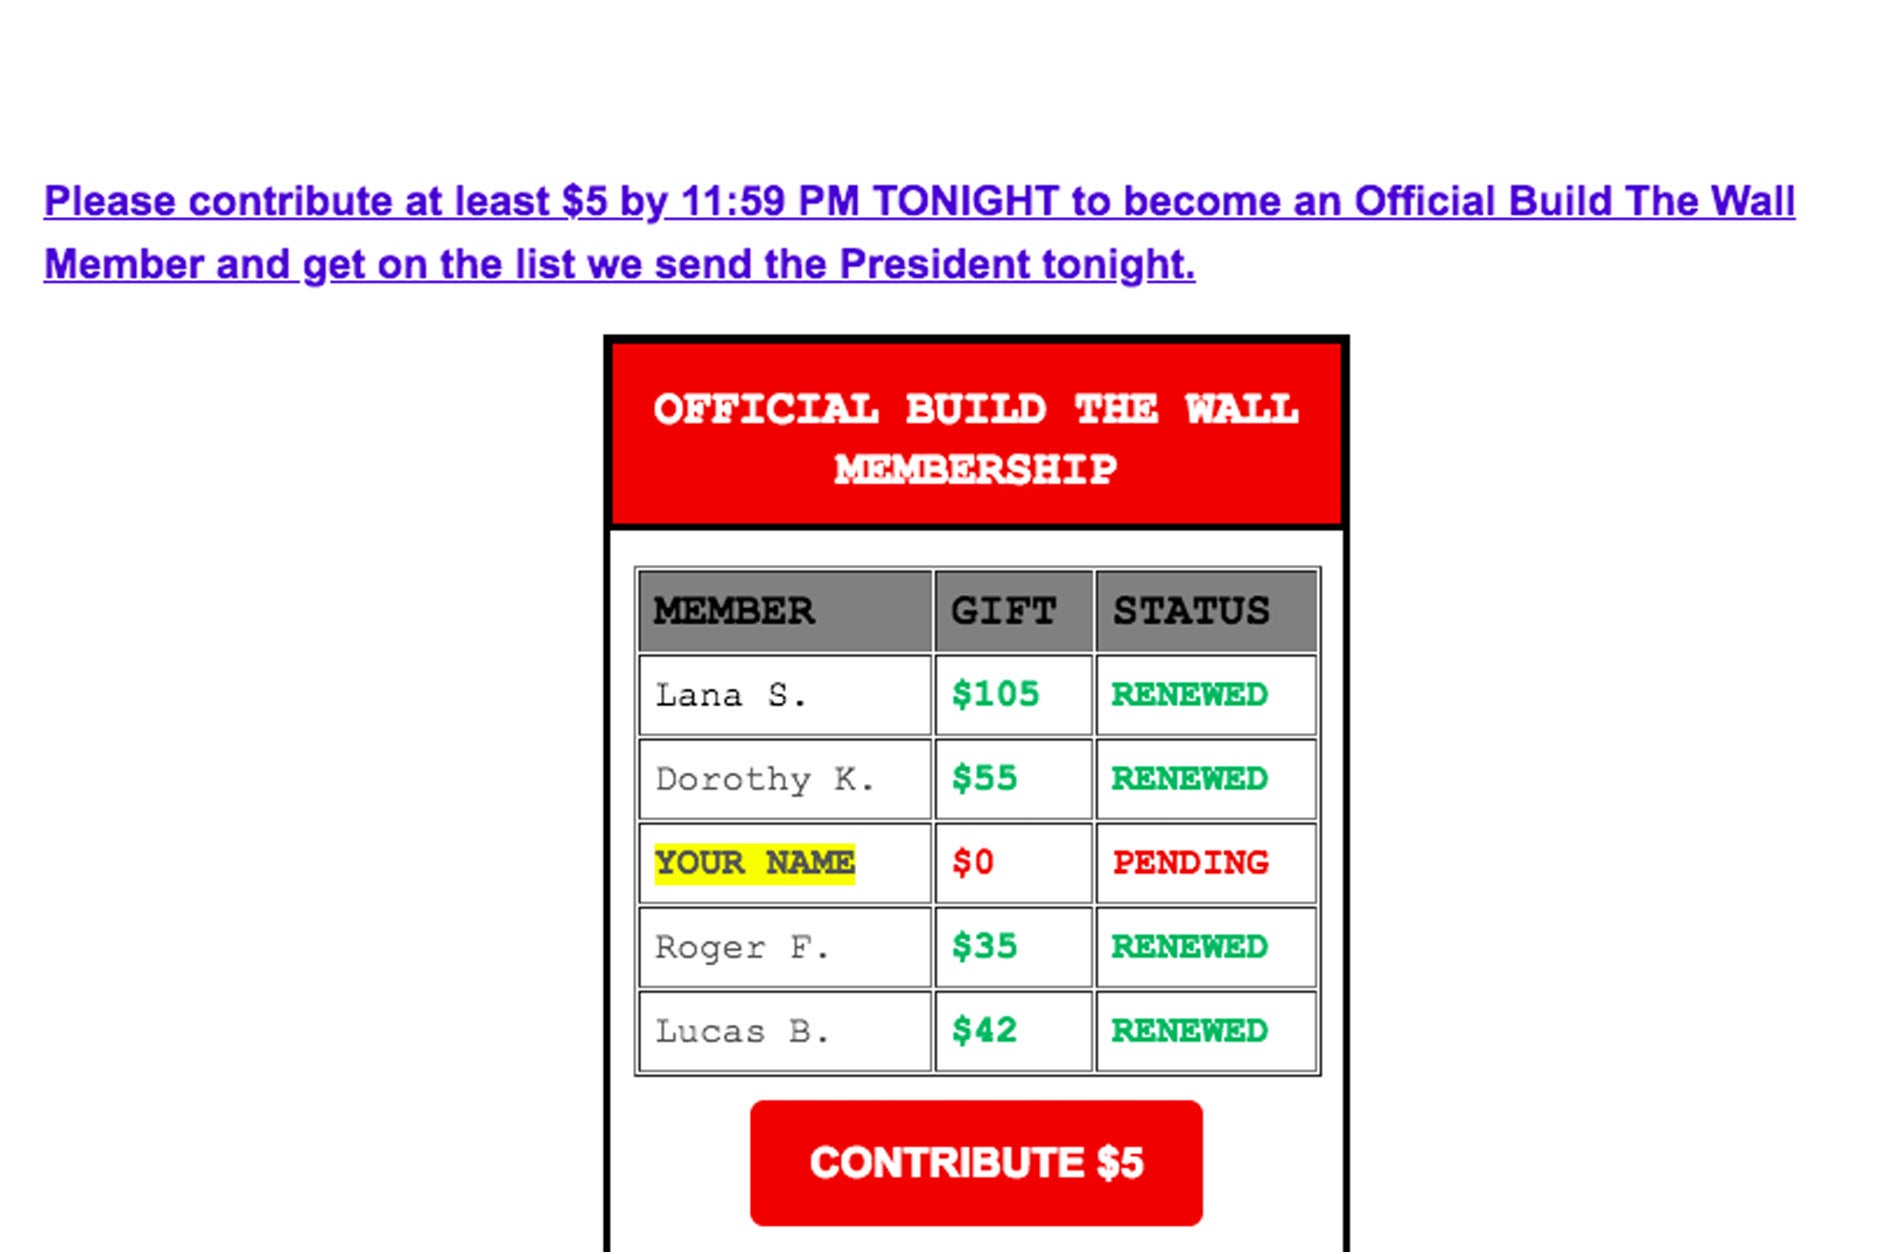 Screengrab of a campaign email: "Please contribute at least $5 by 11:59 PM TONIGHT to become an Official Build The Wall Member and get on the list we send the President tonight."